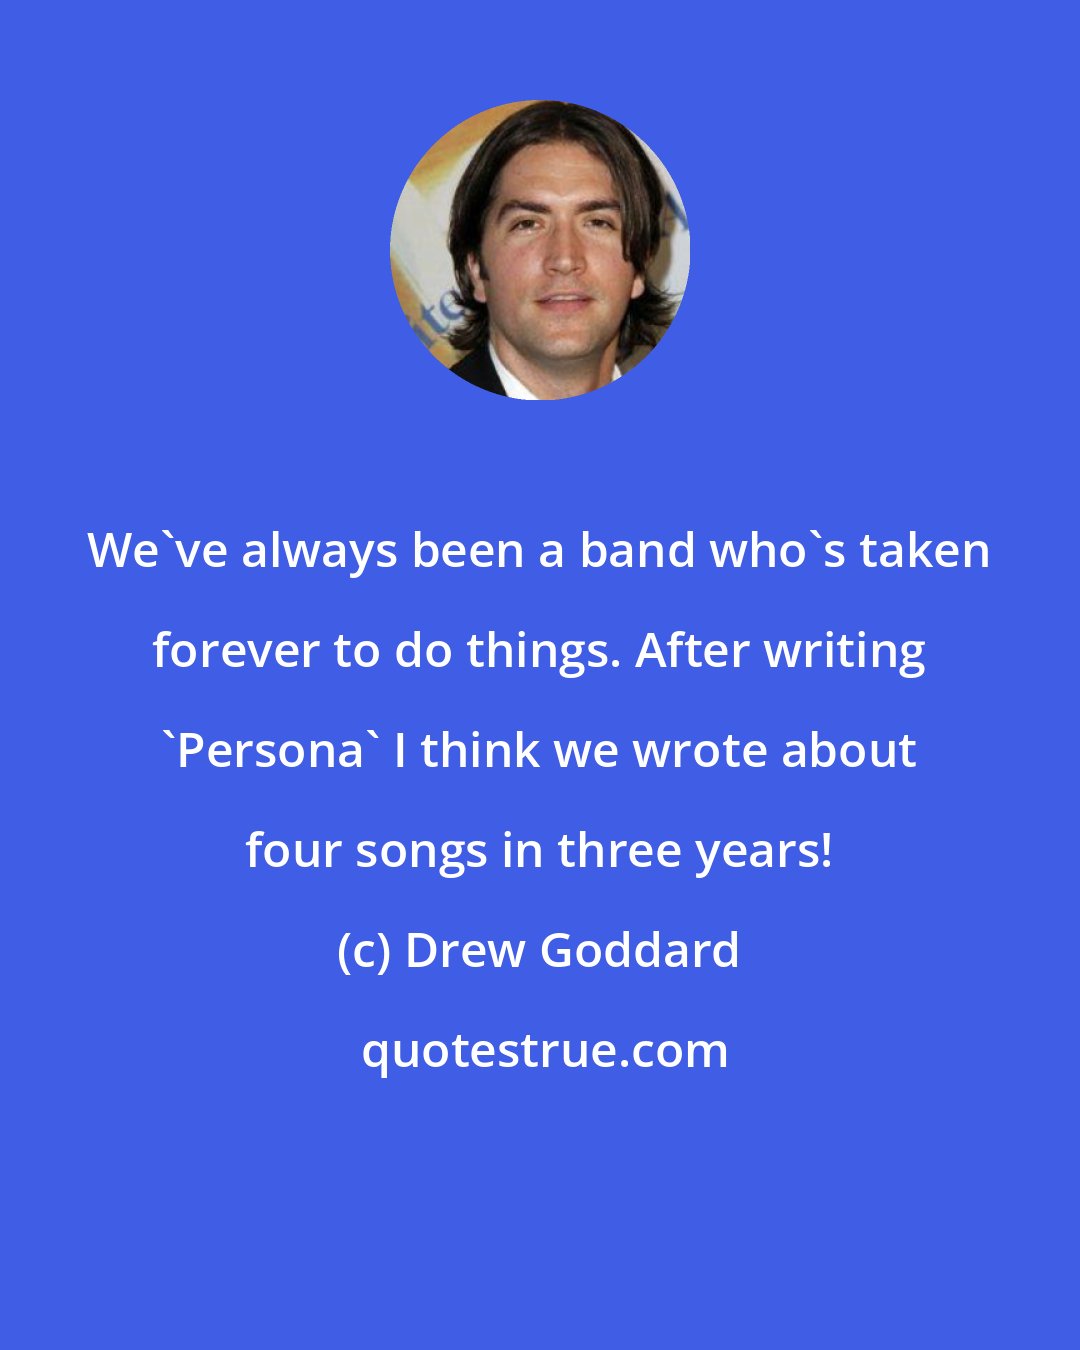 Drew Goddard: We've always been a band who's taken forever to do things. After writing 'Persona' I think we wrote about four songs in three years!